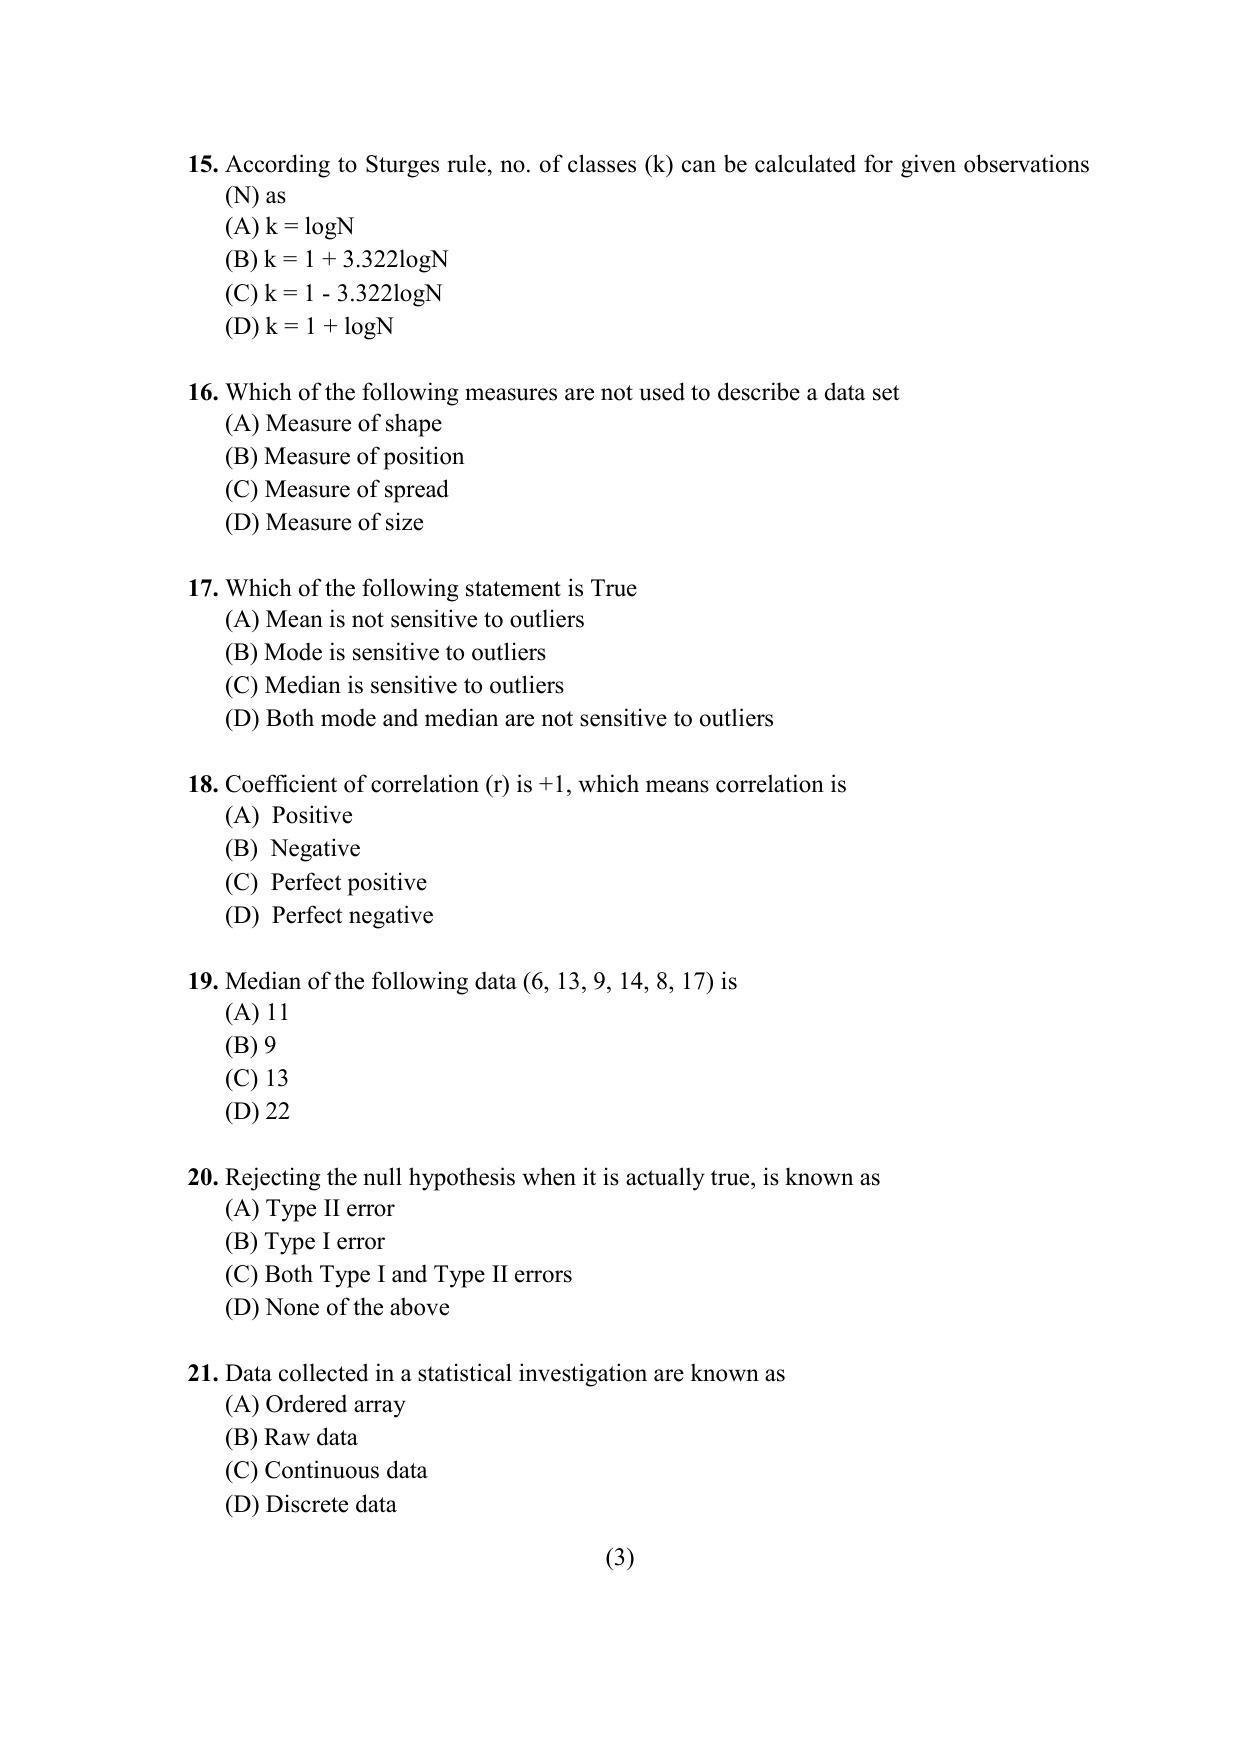 PU MPET Anthropology 2022 Question Papers - Page 13